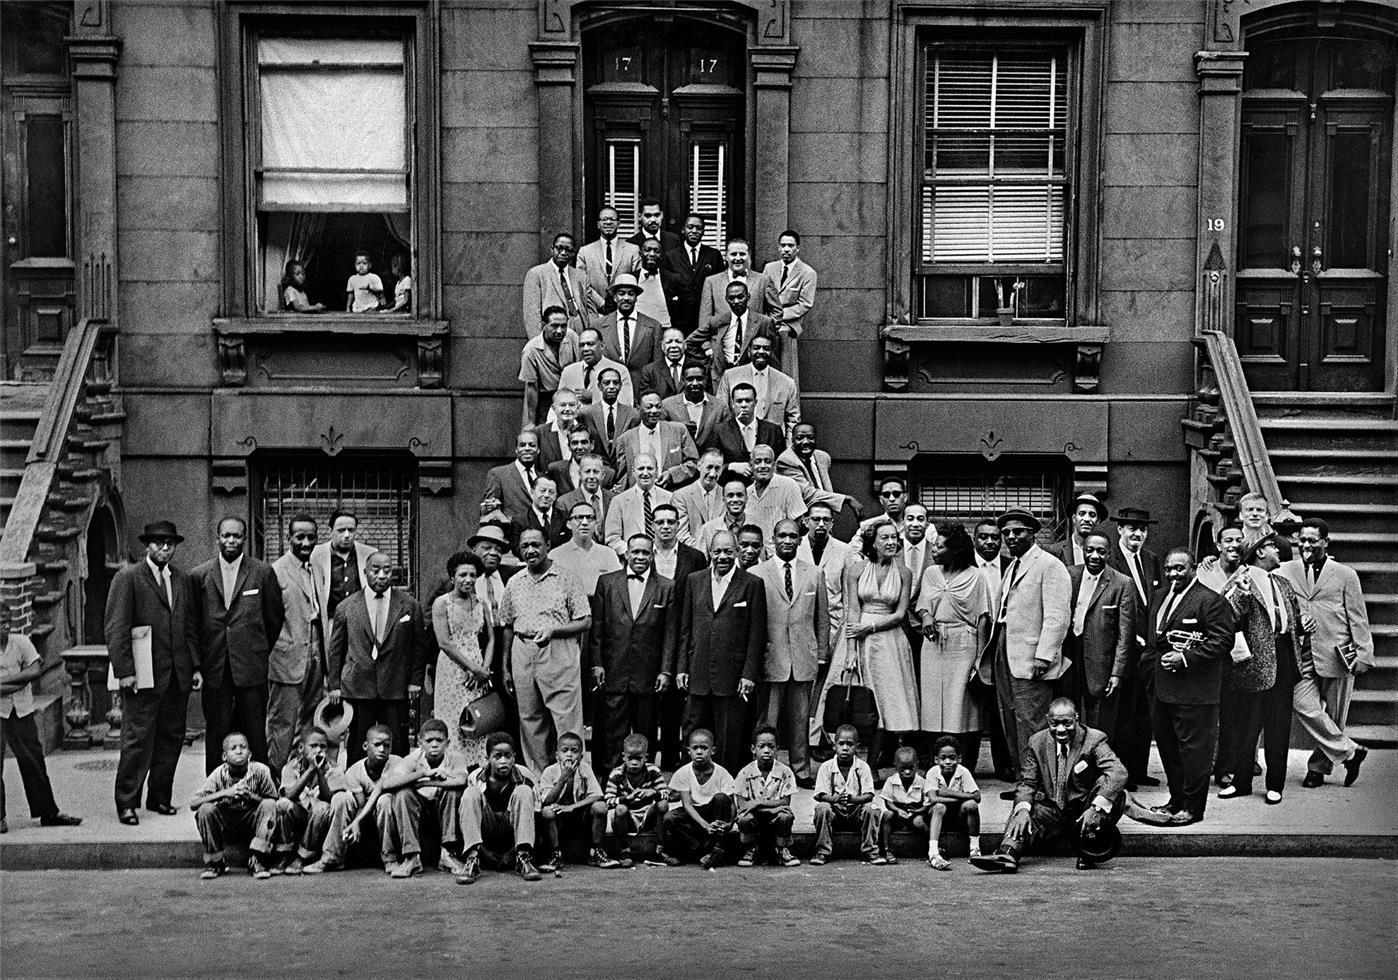 Art Kane Portrait Photograph - A Great Day in Harlem, 1958